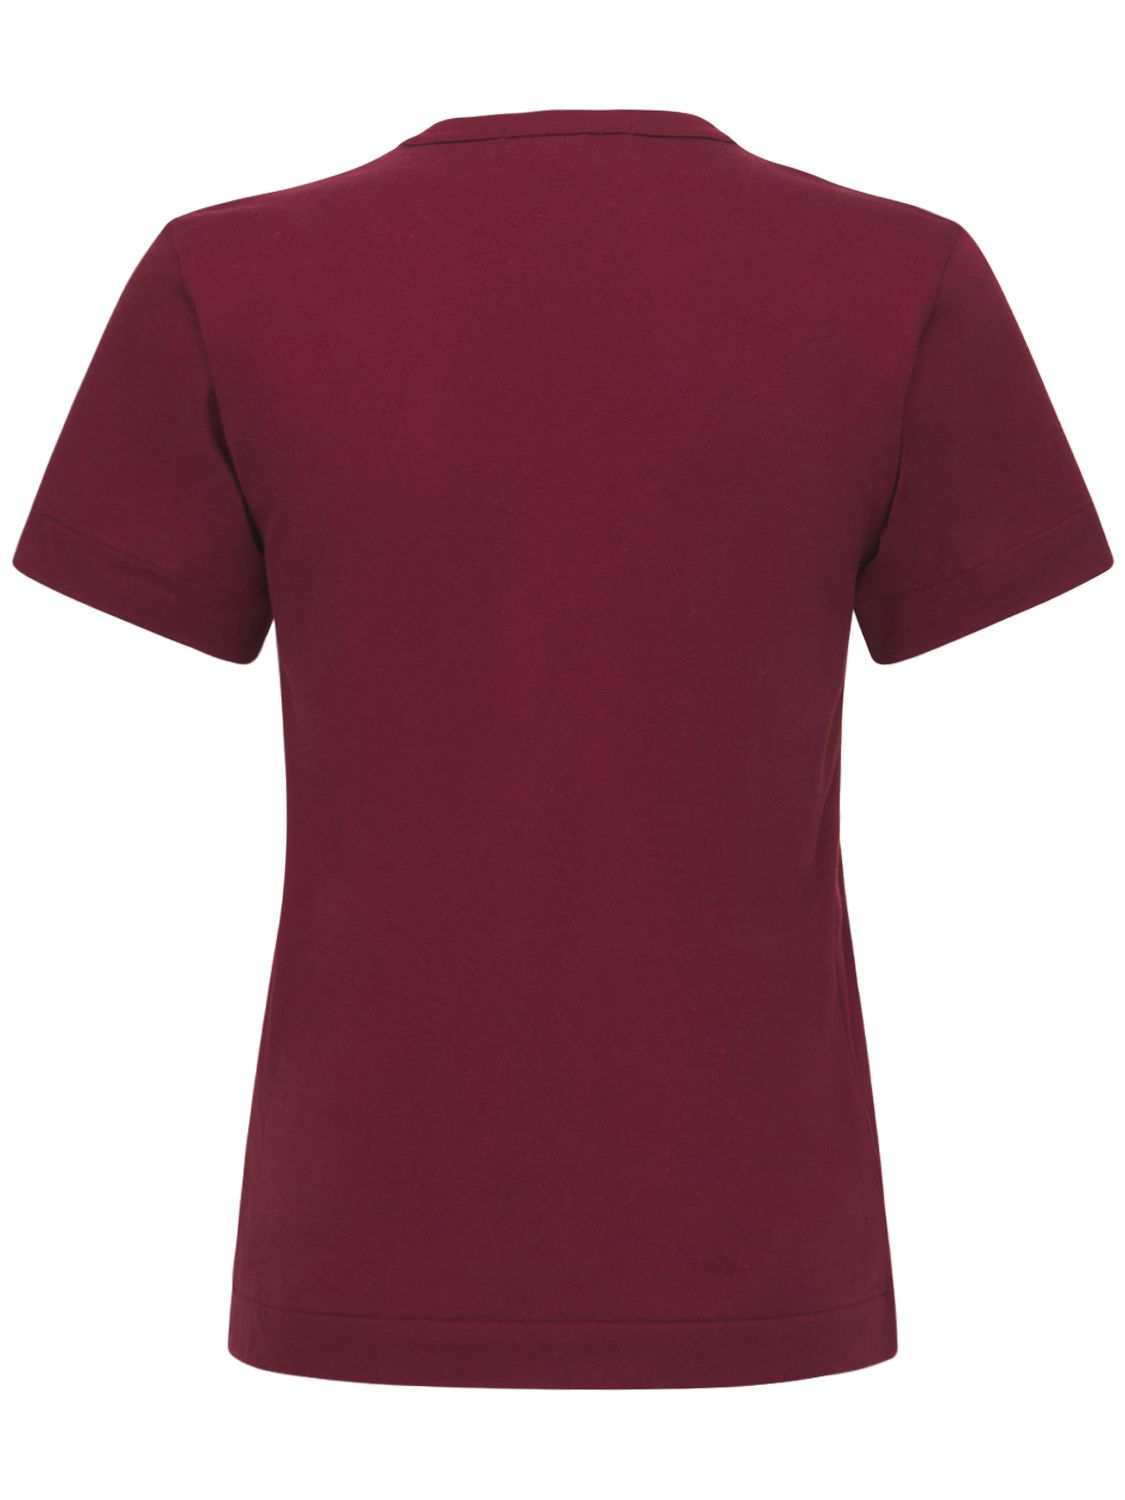 Shop Comme Des Garçons Play Embroidered Hearts Cotton T-shirt In Burgundy